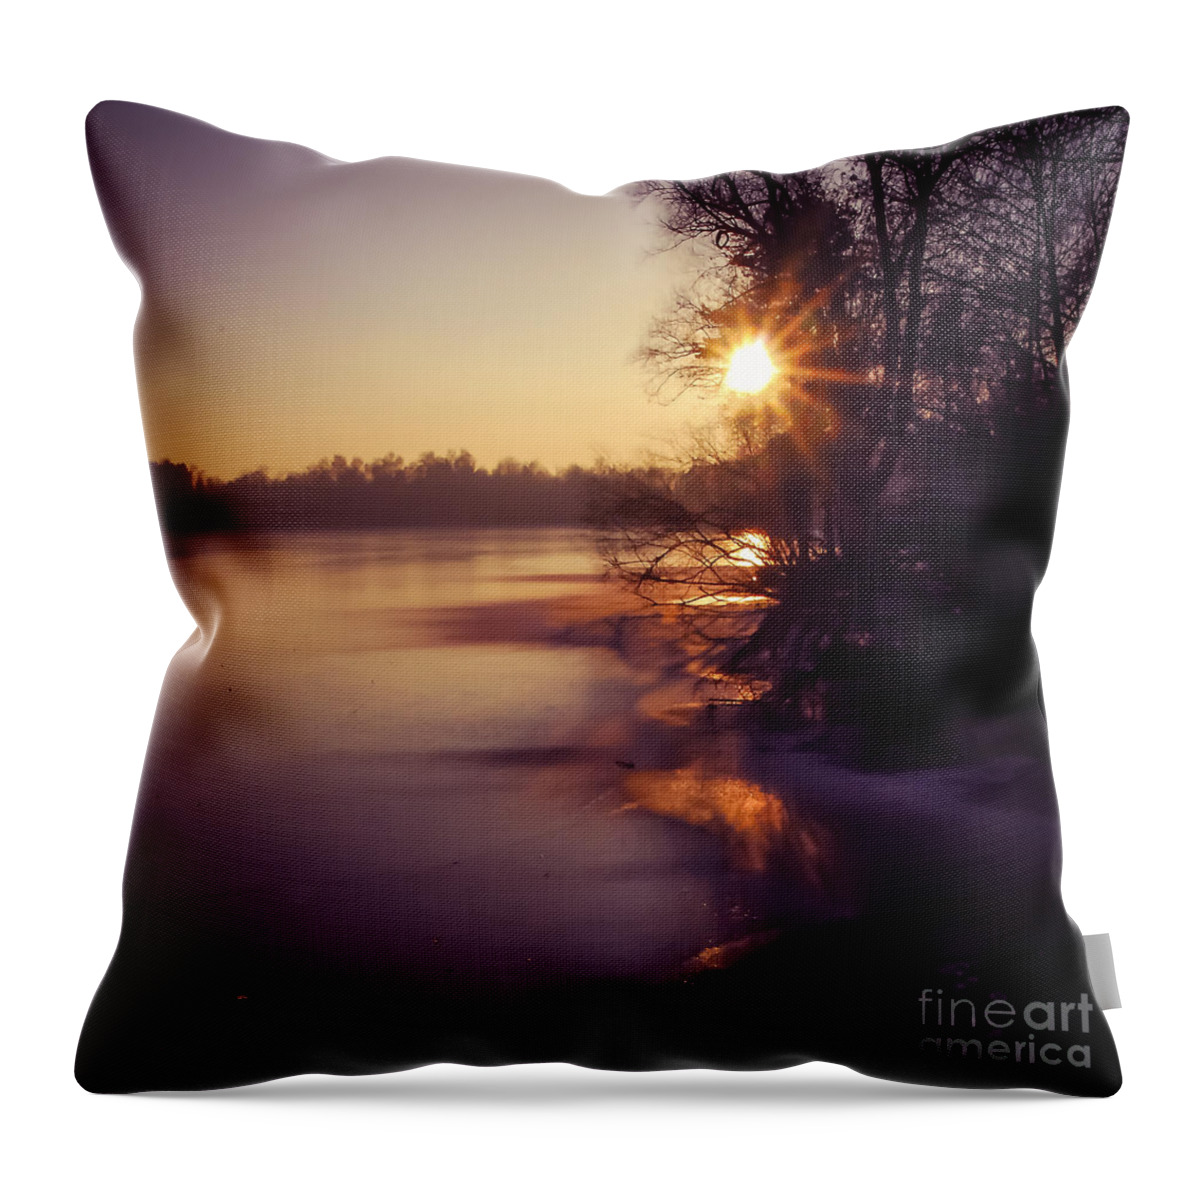 1x1 Throw Pillow featuring the photograph The Wintersun by Hannes Cmarits